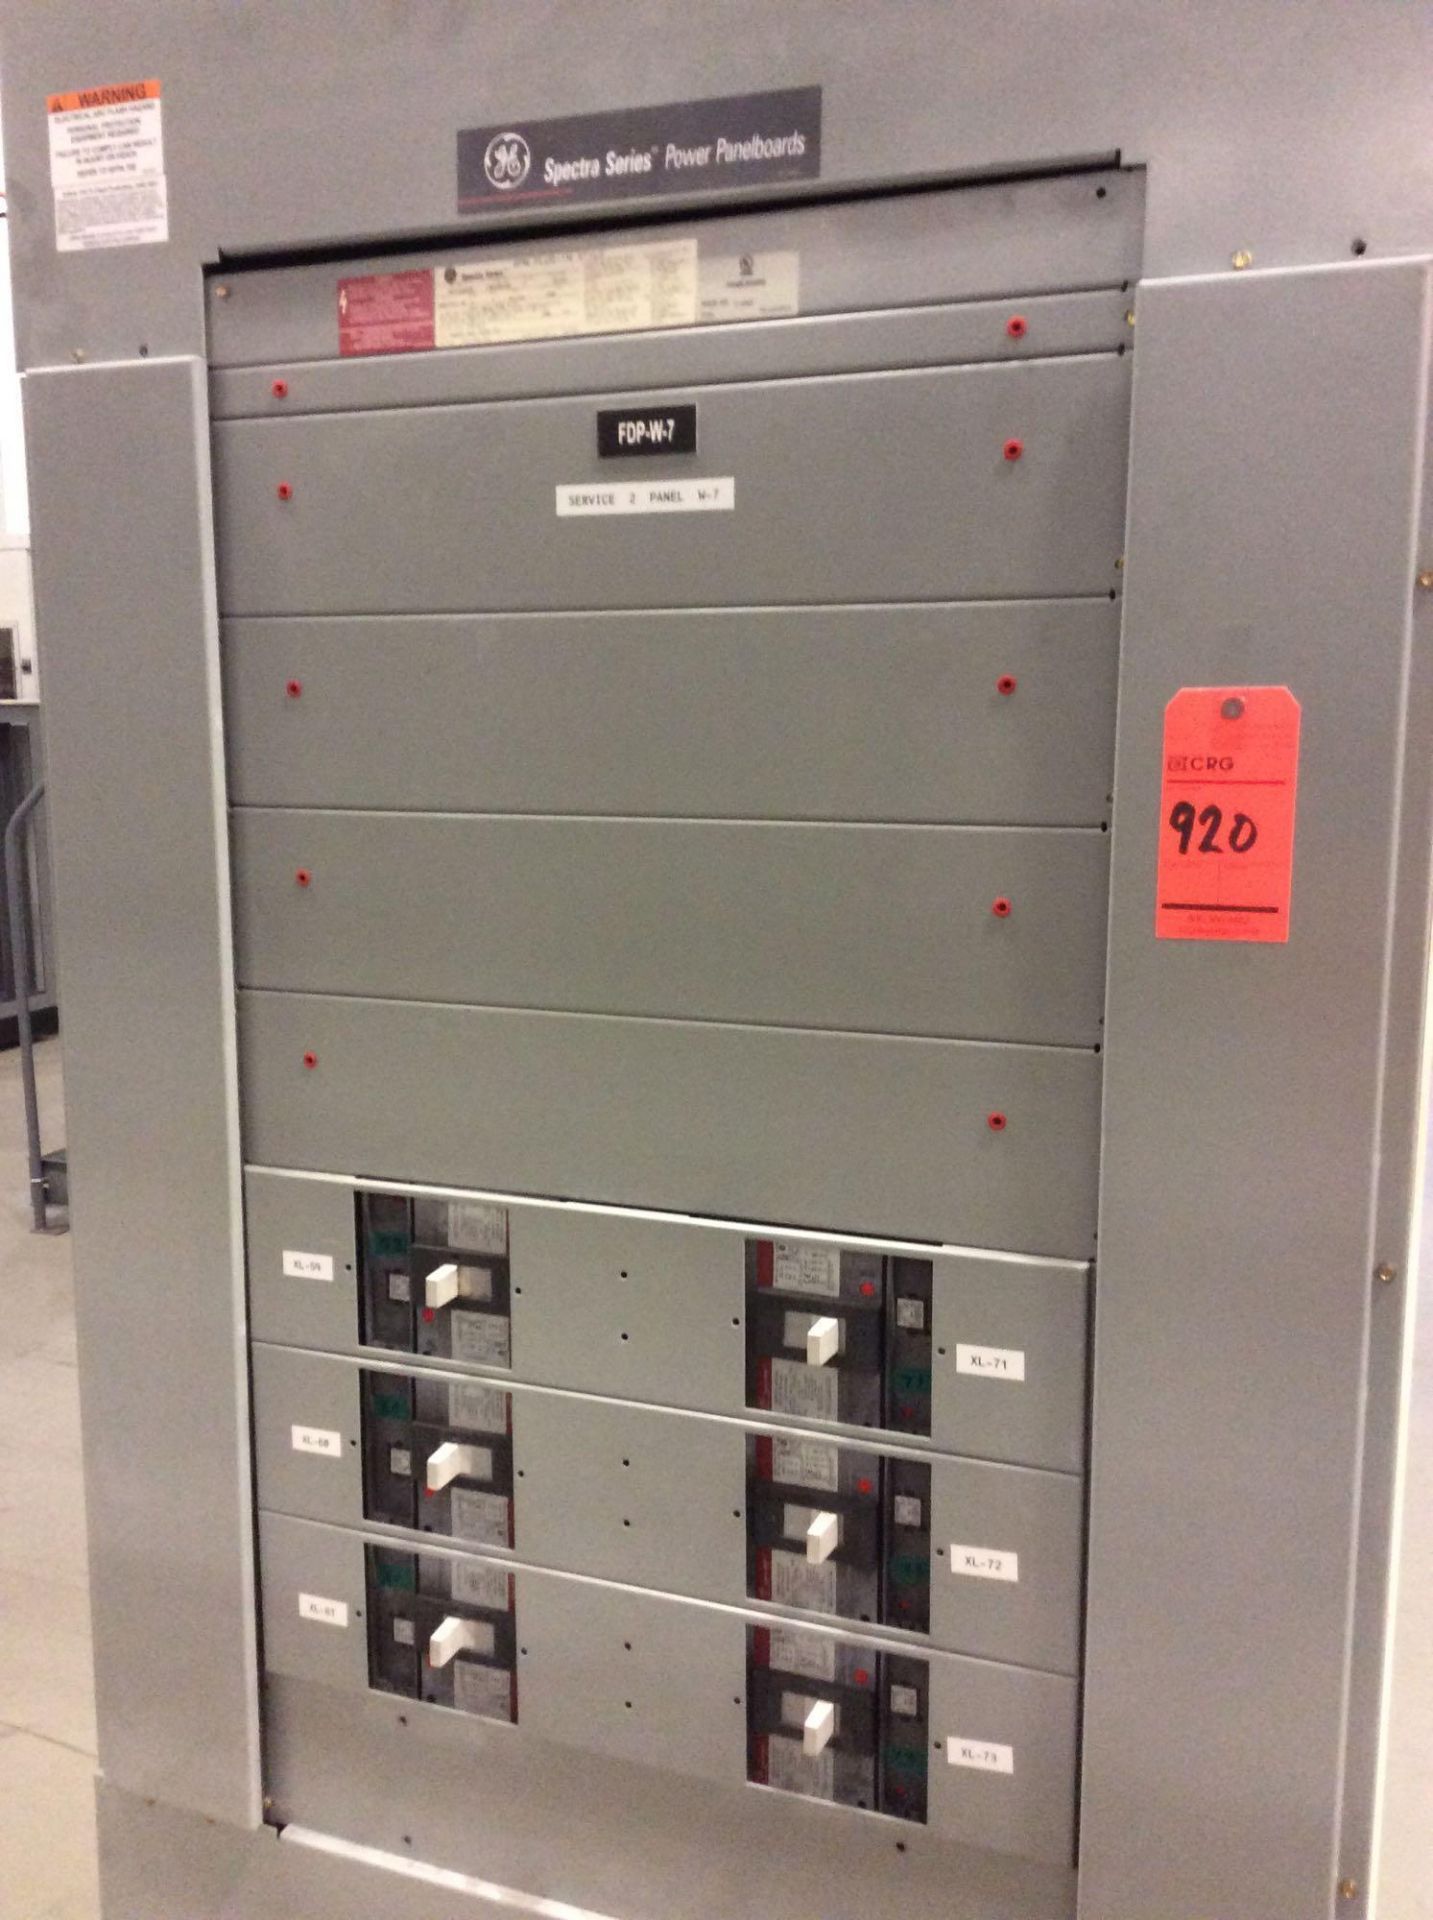 Lot of (8) GE Spectra Series power panel boards with asst circuit breakers (LOCATED IN BATAVIA) - Image 14 of 17